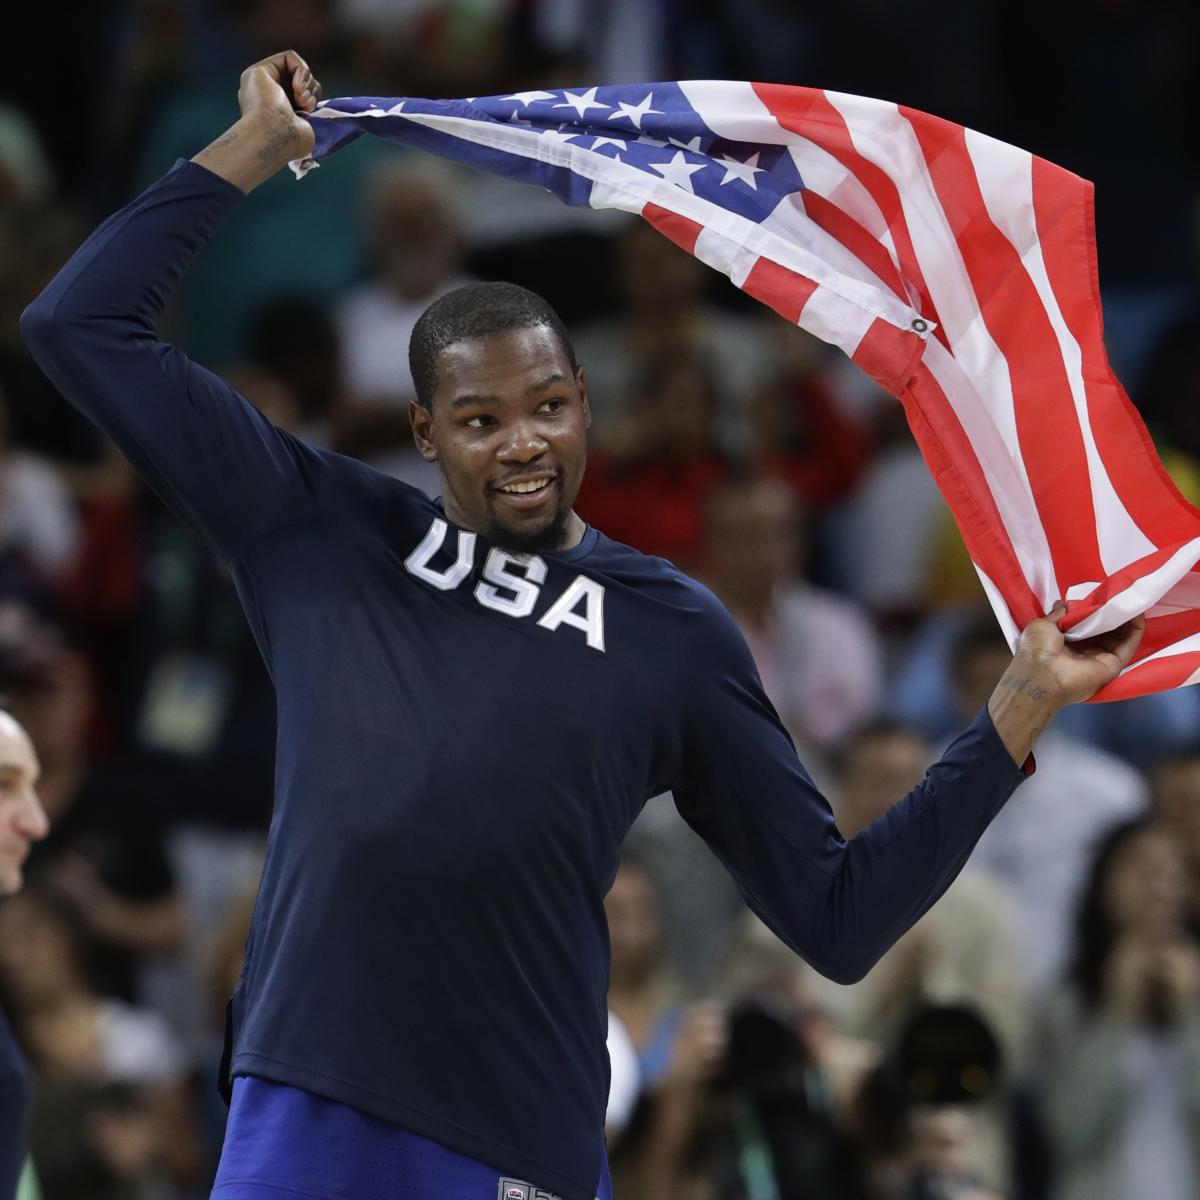 Durant Lillard And Usa Men S Basketball Team Roster For 21 Tokyo Olympics Bleacher Report Latest News Videos And Highlights